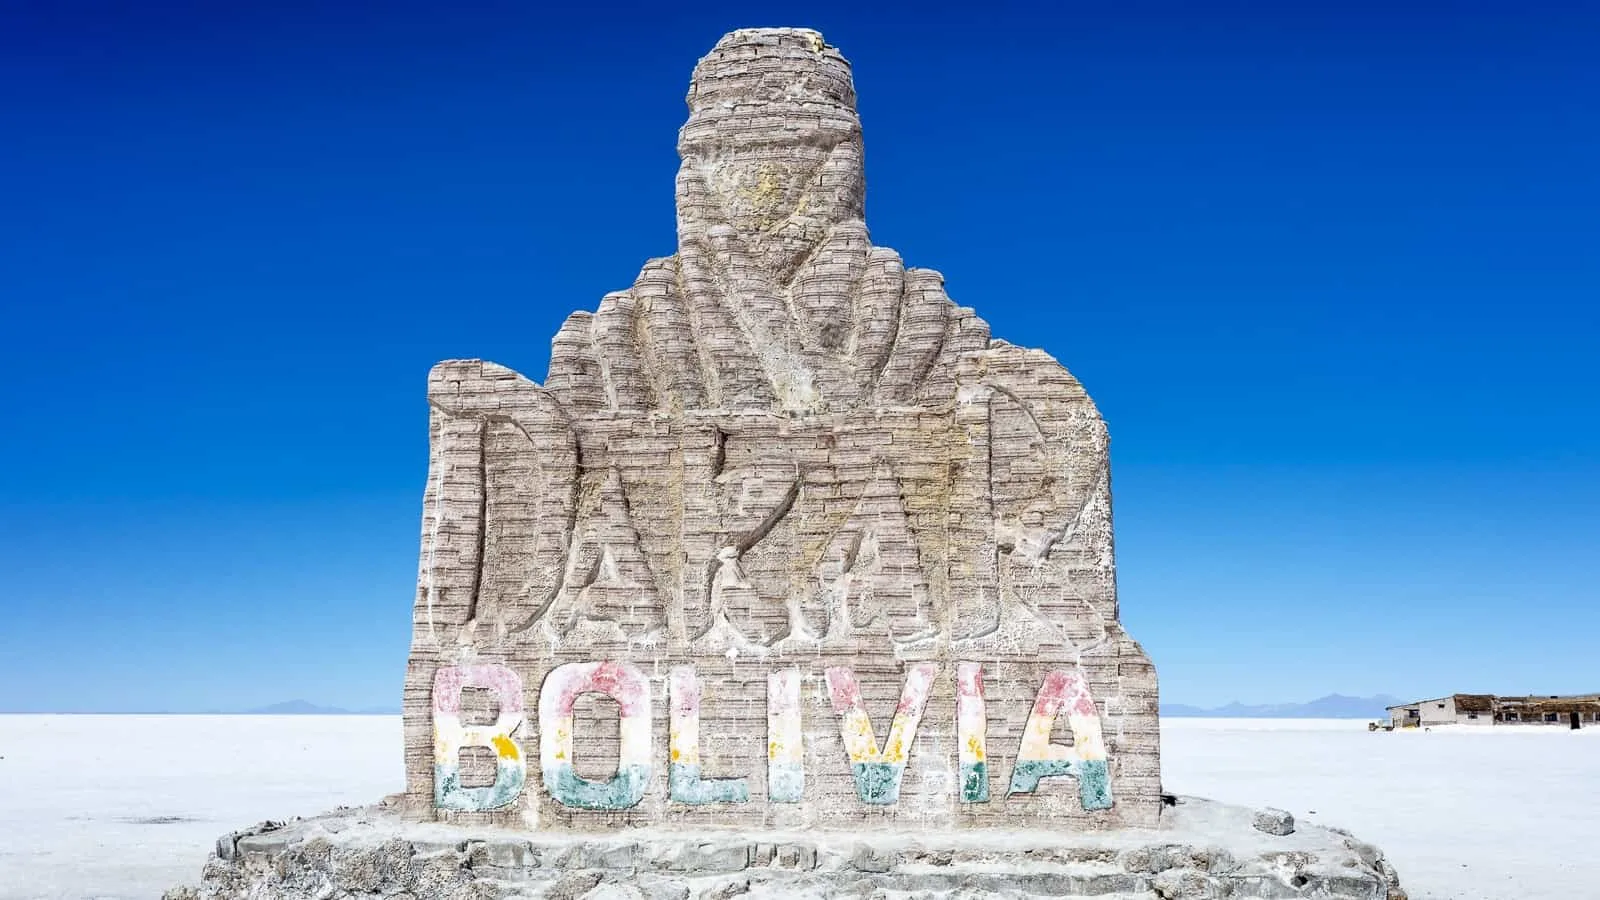 Use our Bolivia travel guide to plan your overland adventure through this adventurous South American country. Travelling at your own pace is the best way to see Bolivia.